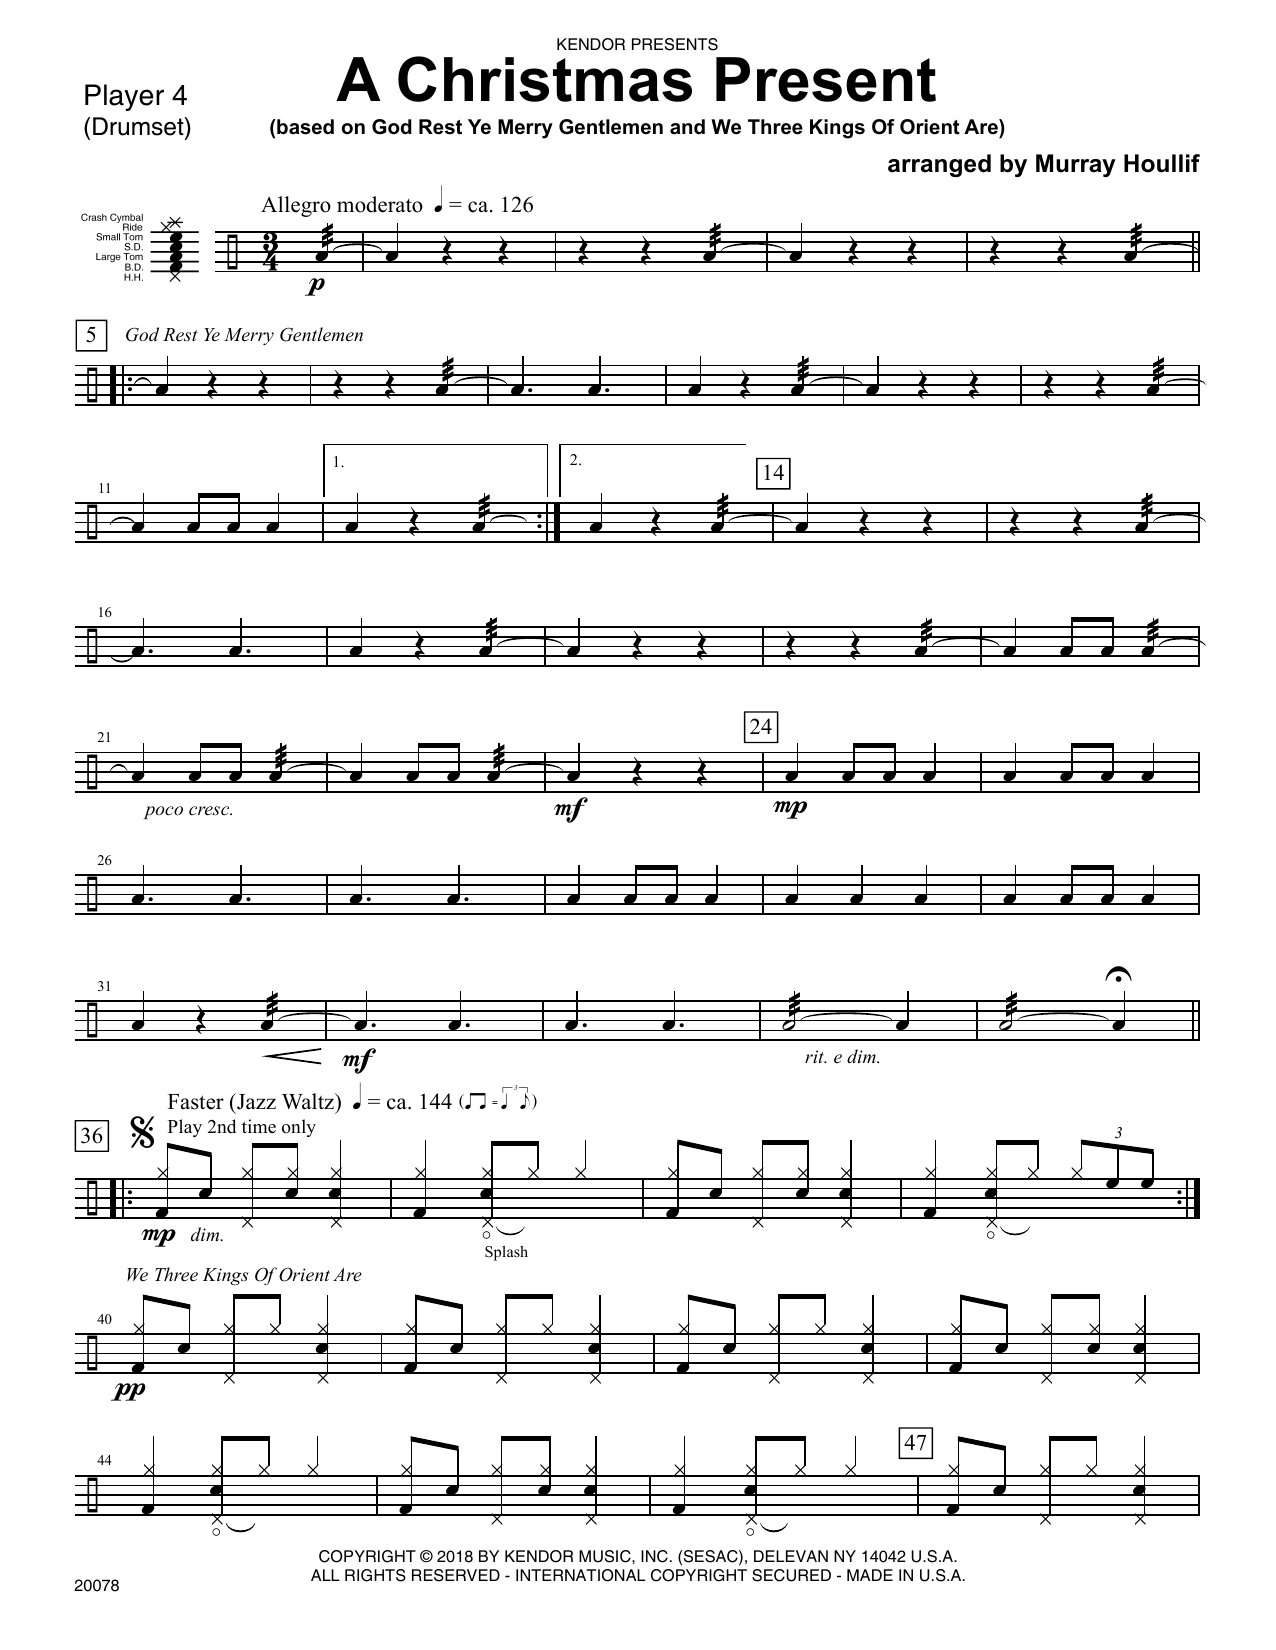 Download Murray Houllif A Christmas Present - Percussion 4 Sheet Music